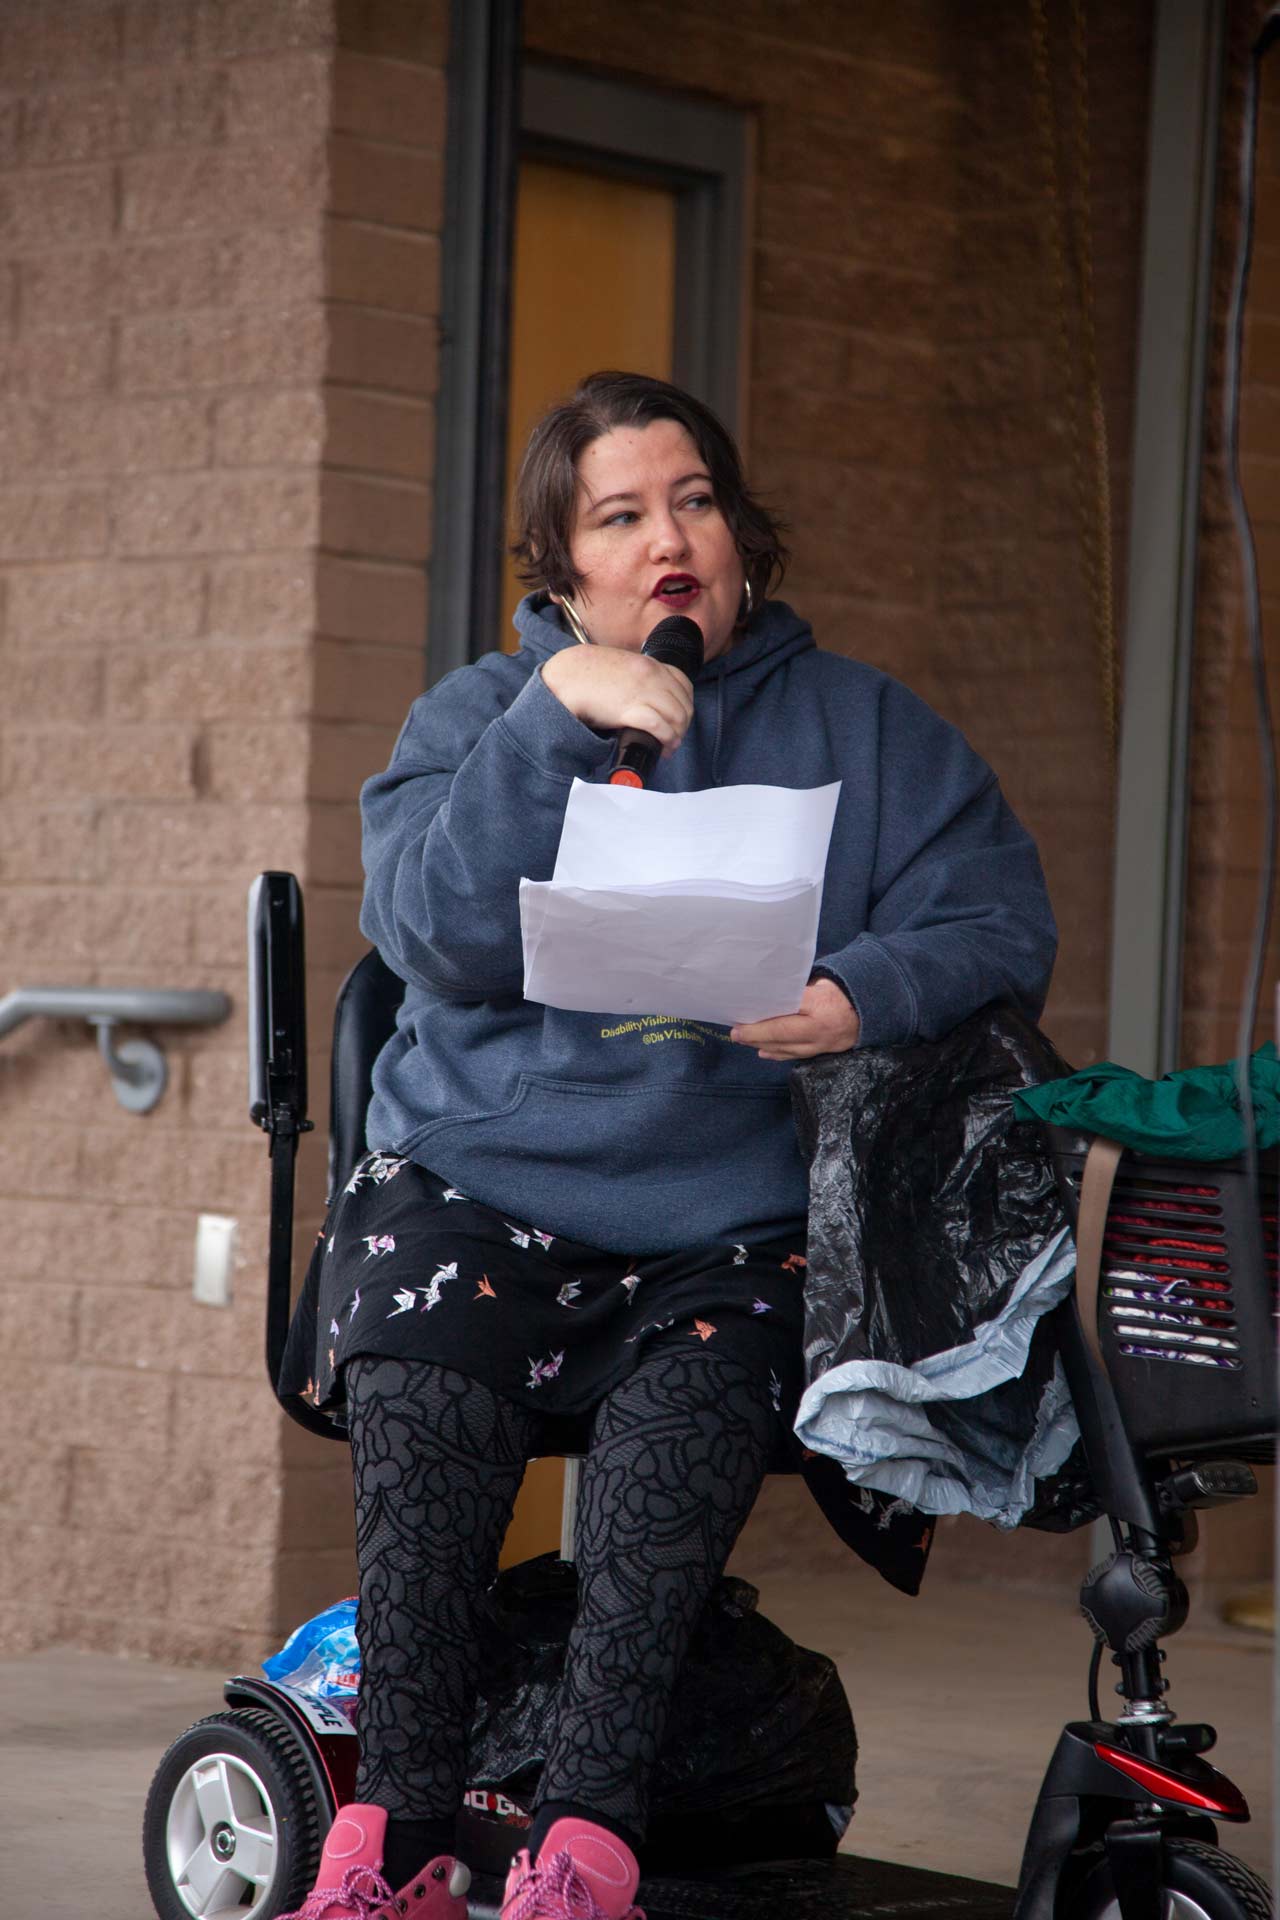 Tucson native Naomi Ortiz is performing her poetry on stage at Tucson's first Disability Pride Celebration.